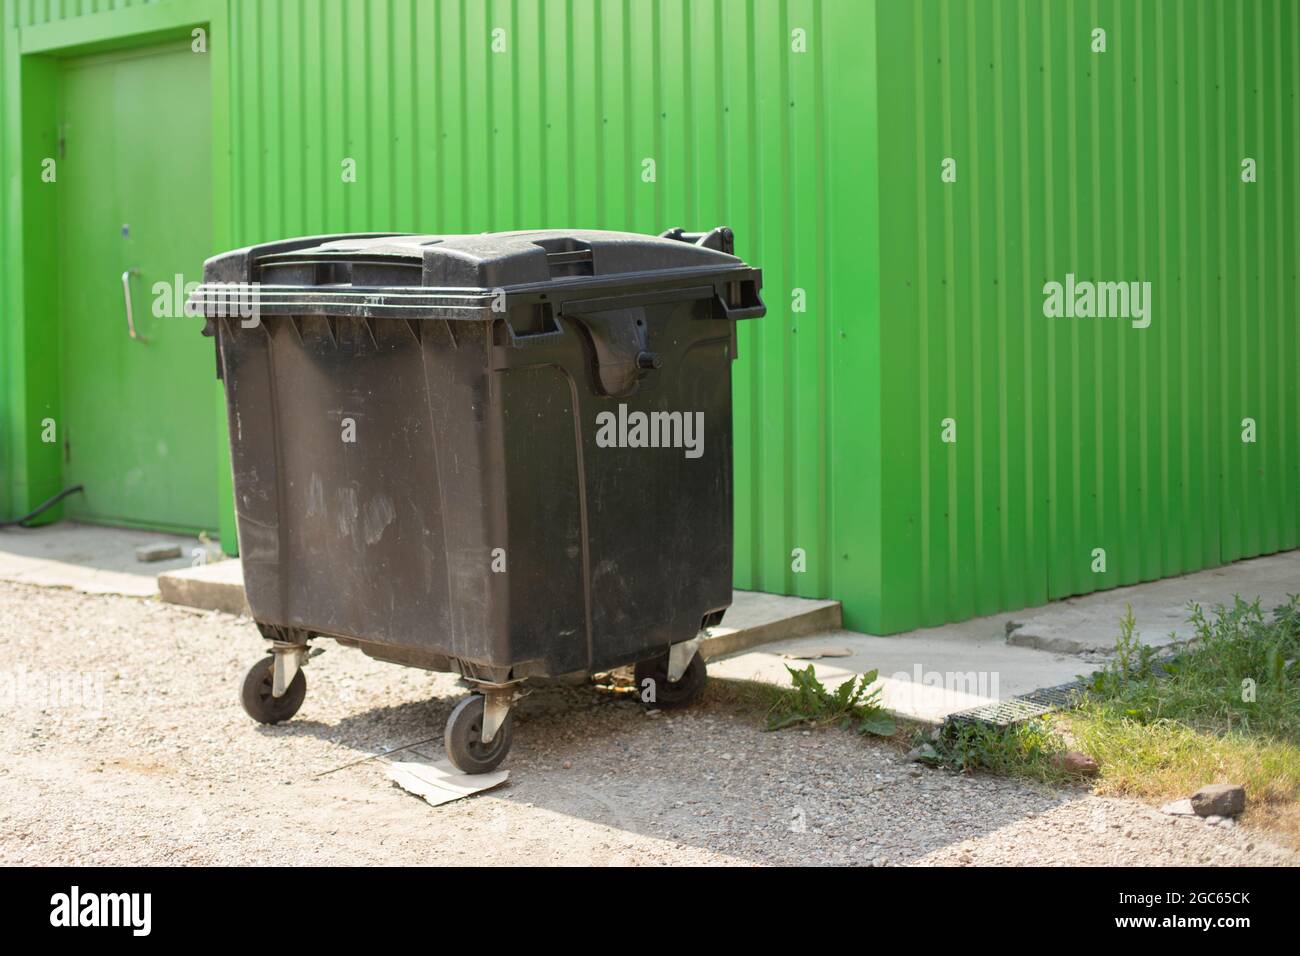 Garbage container on the street. One container for collecting waste. Black tank on wheels. Place of trash discharge. Stock Photo